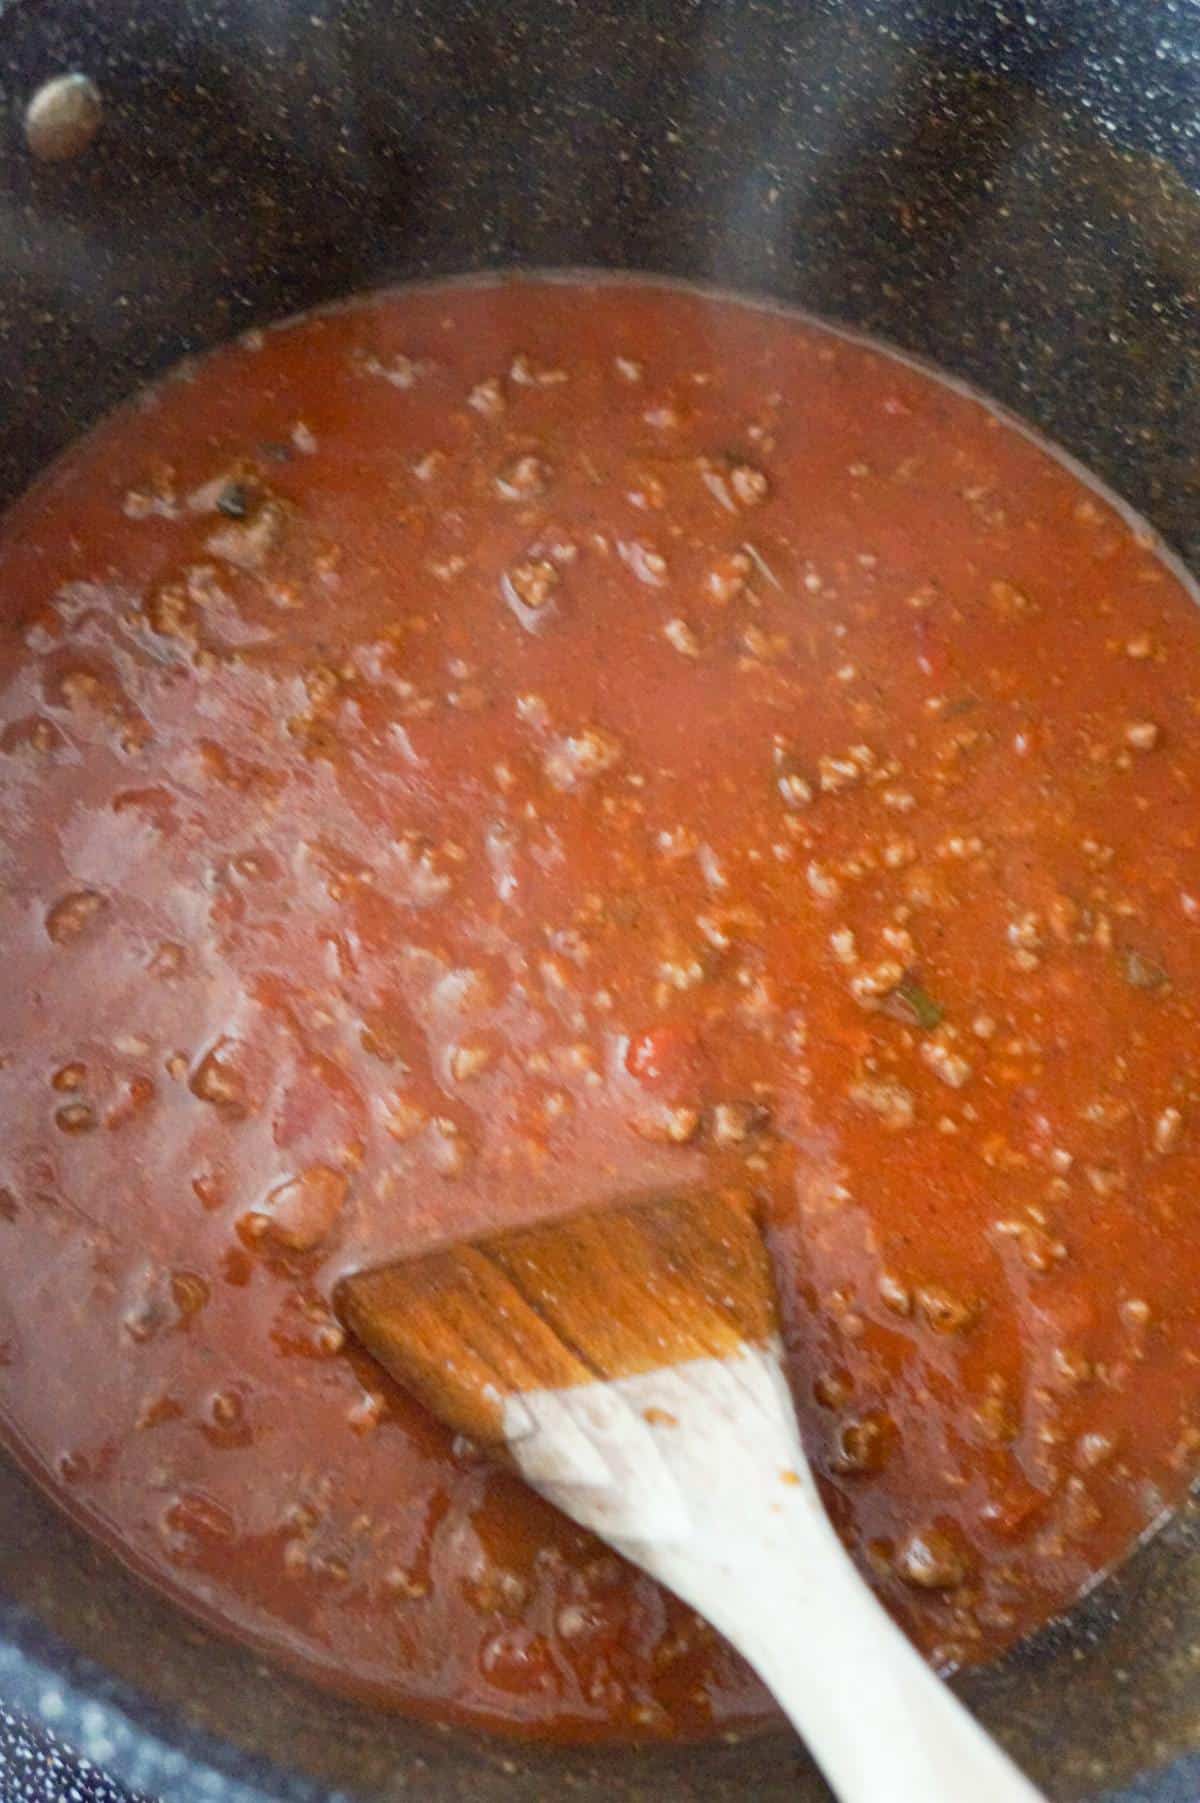 tomato sauce and ground beef mixture in a large pot